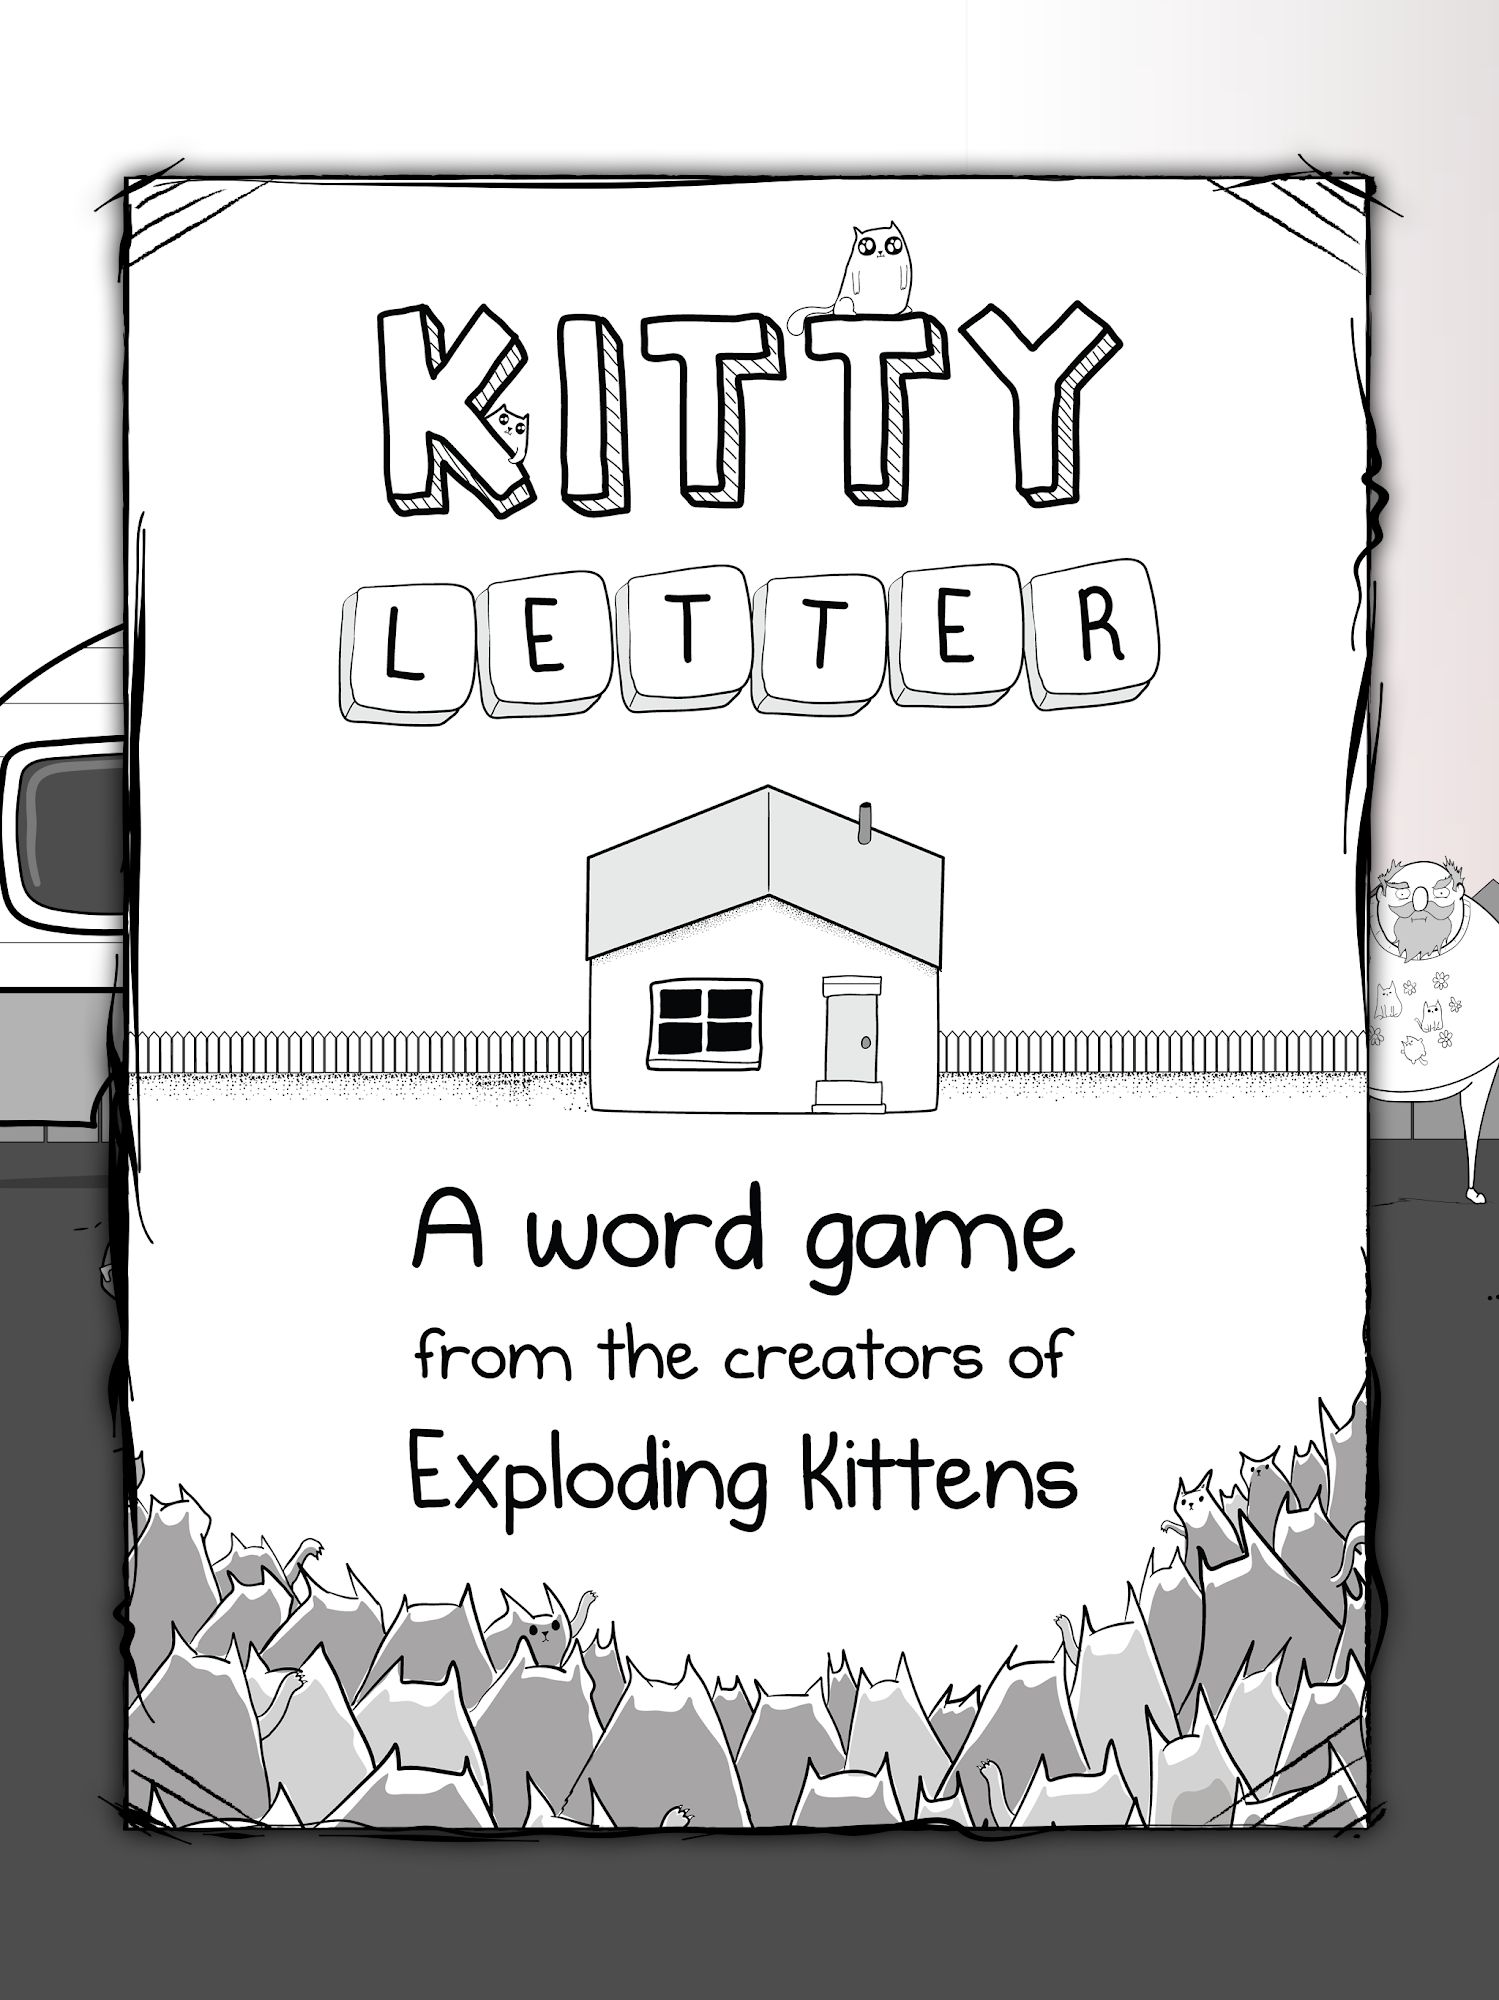 Full version of Android Arcade game apk Kitty Letter for tablet and phone.